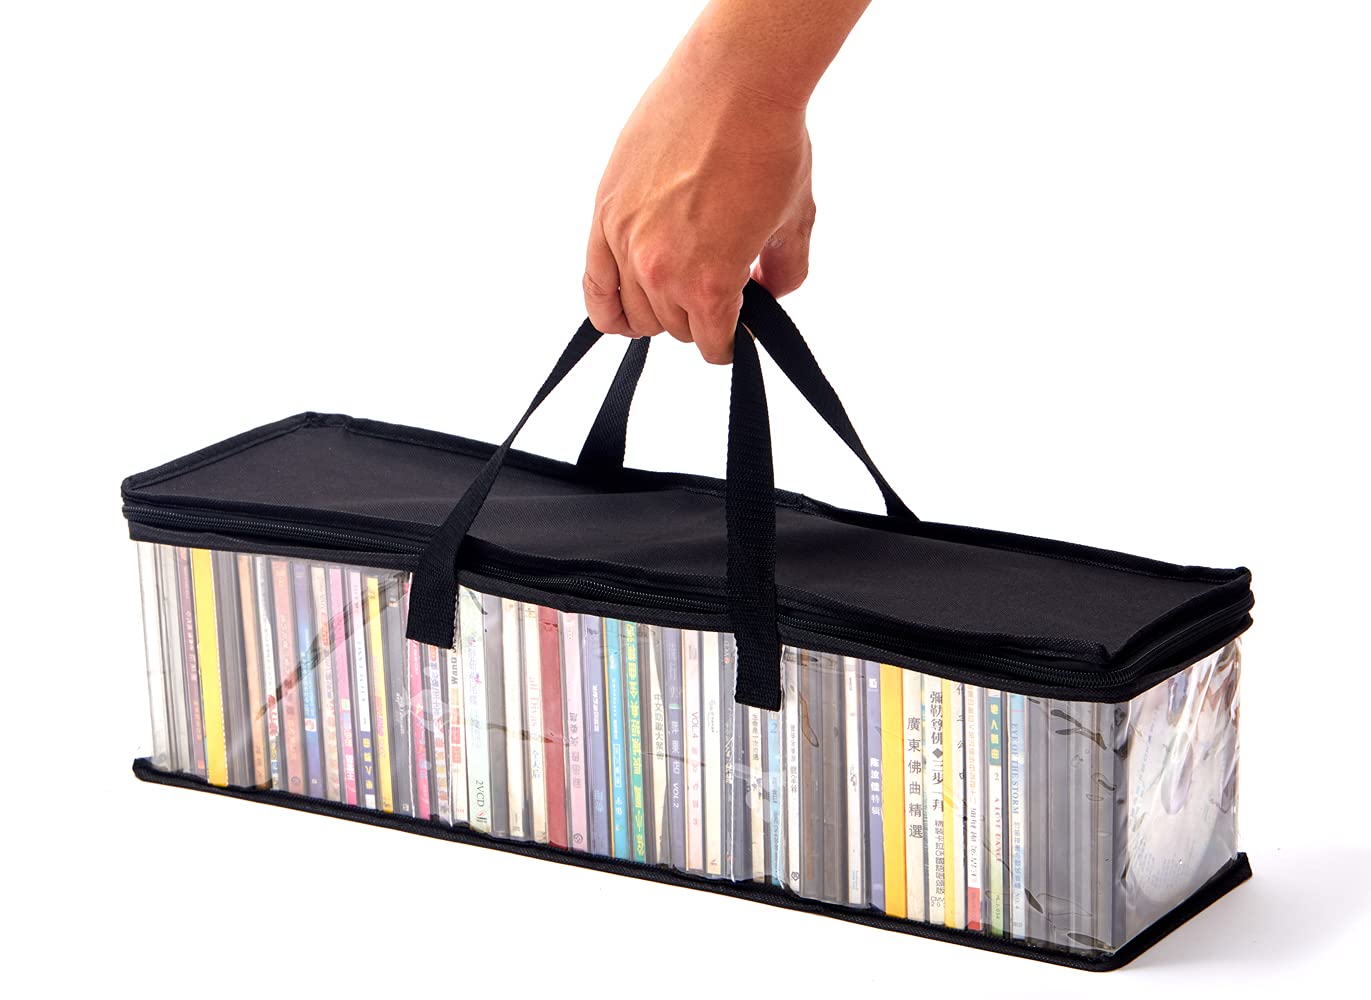 Imperius Set of 2 Portable CD Sturdy Storage Collection Bag/Moistureproof with Zipper and Carrying Handles/Easy to Carry/Total 96 CD's